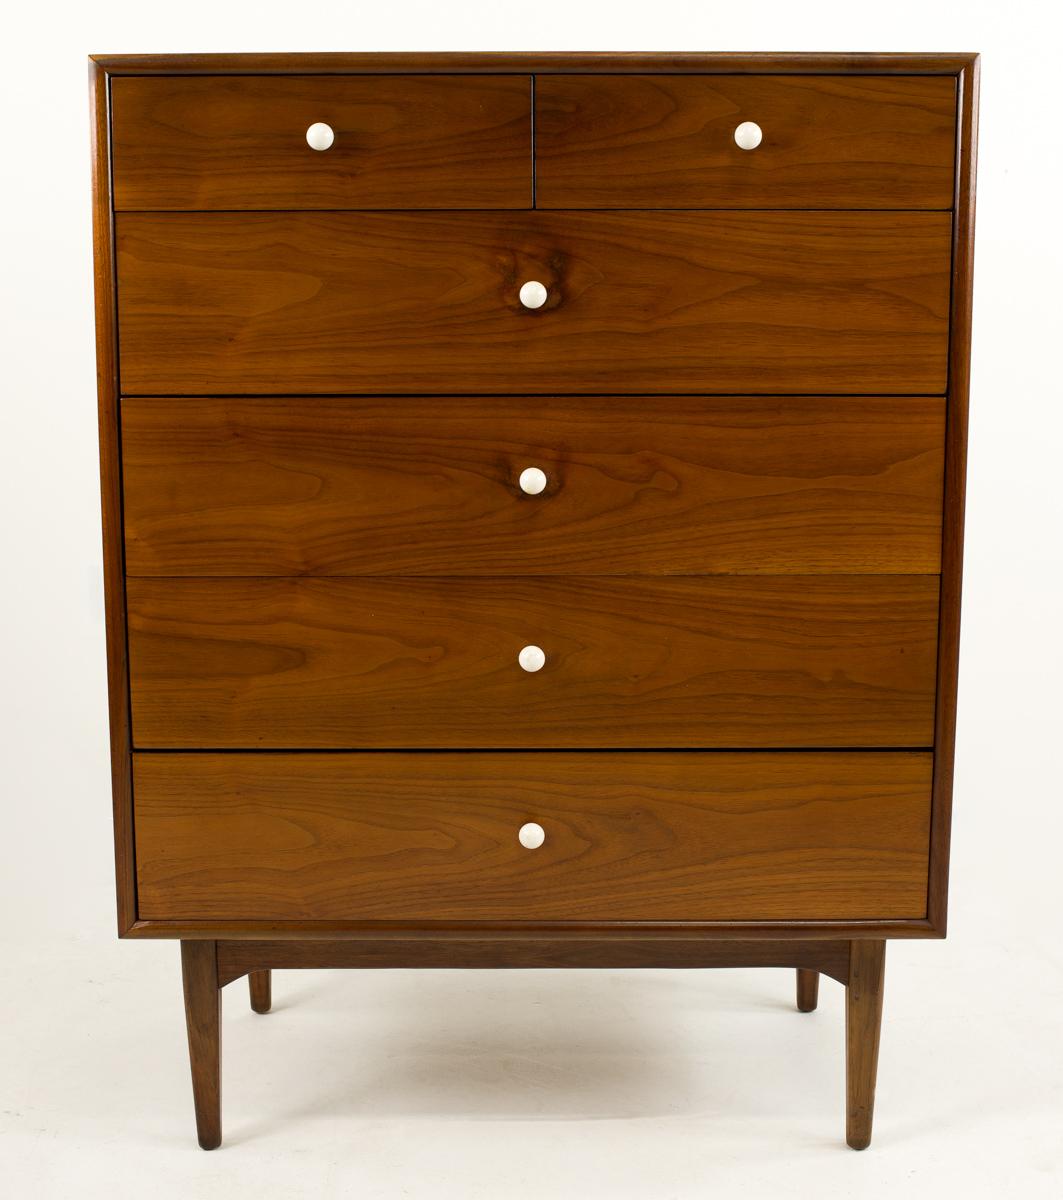 Kipp Stewart for Drexel Declaration mid century highboy dresser chest
This highboy measures: 34 wide x 20 deep x 45.5 inches tall

All pieces of furniture can be had in what we call restored vintage condition. That means the piece is restored upon